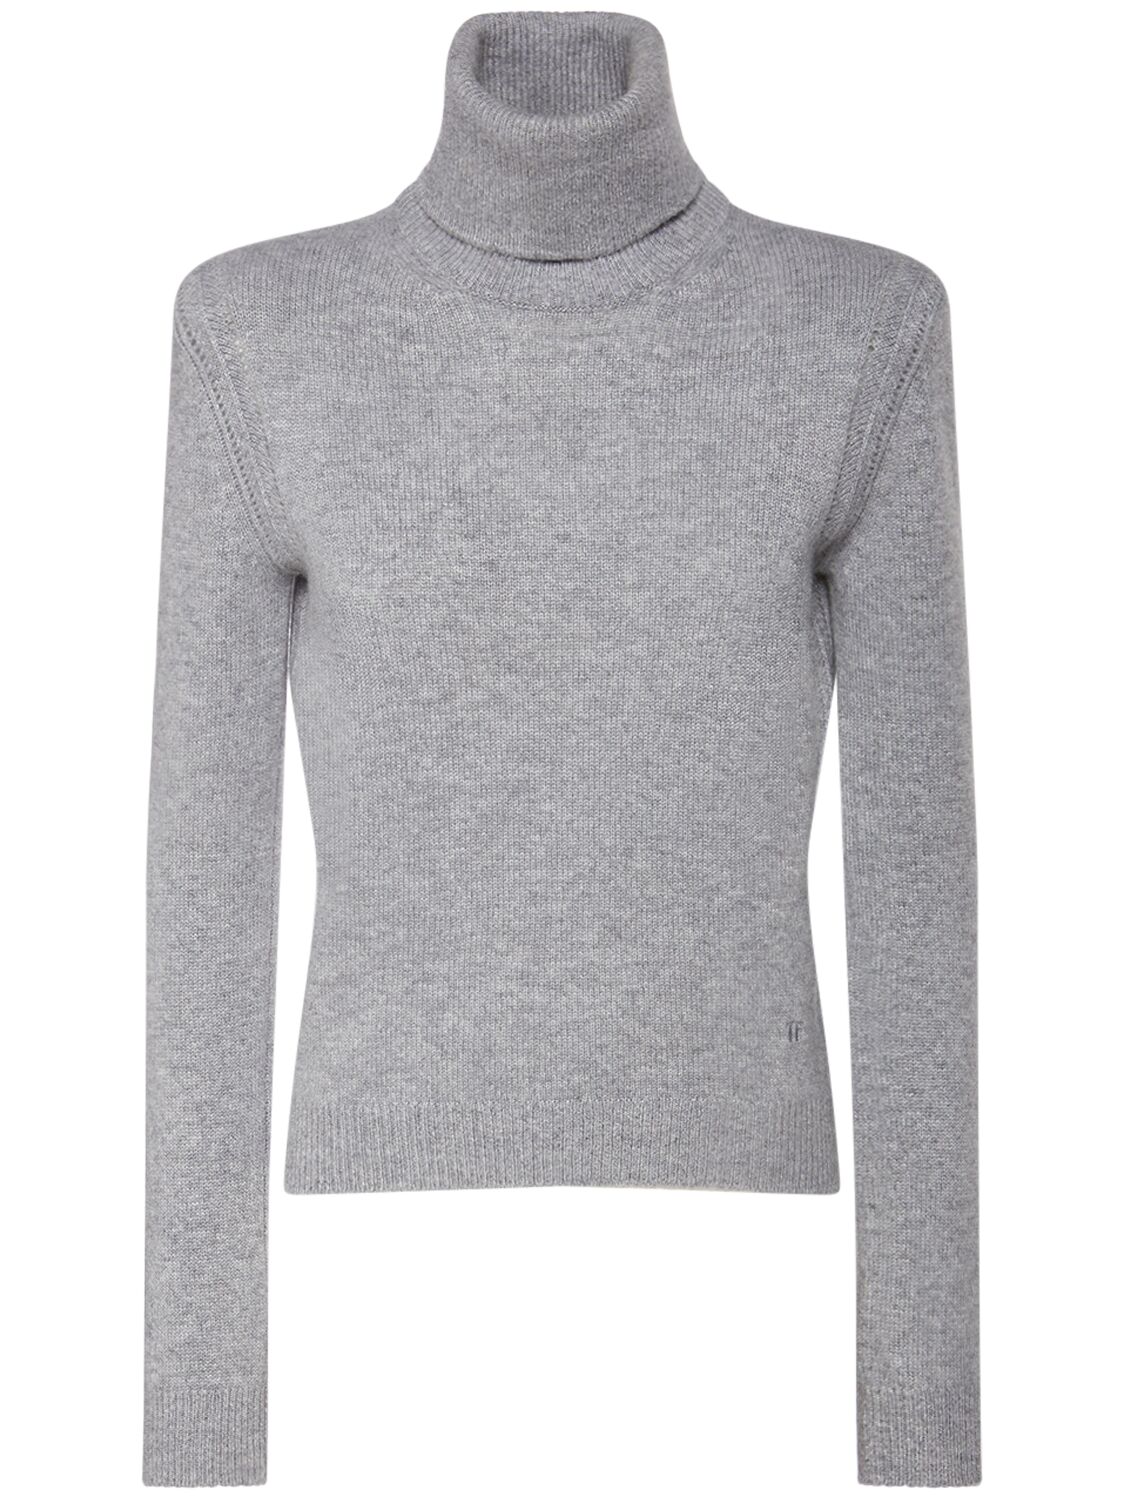 Tom Ford Cashmere Knit Turtleneck Sweater In Grey